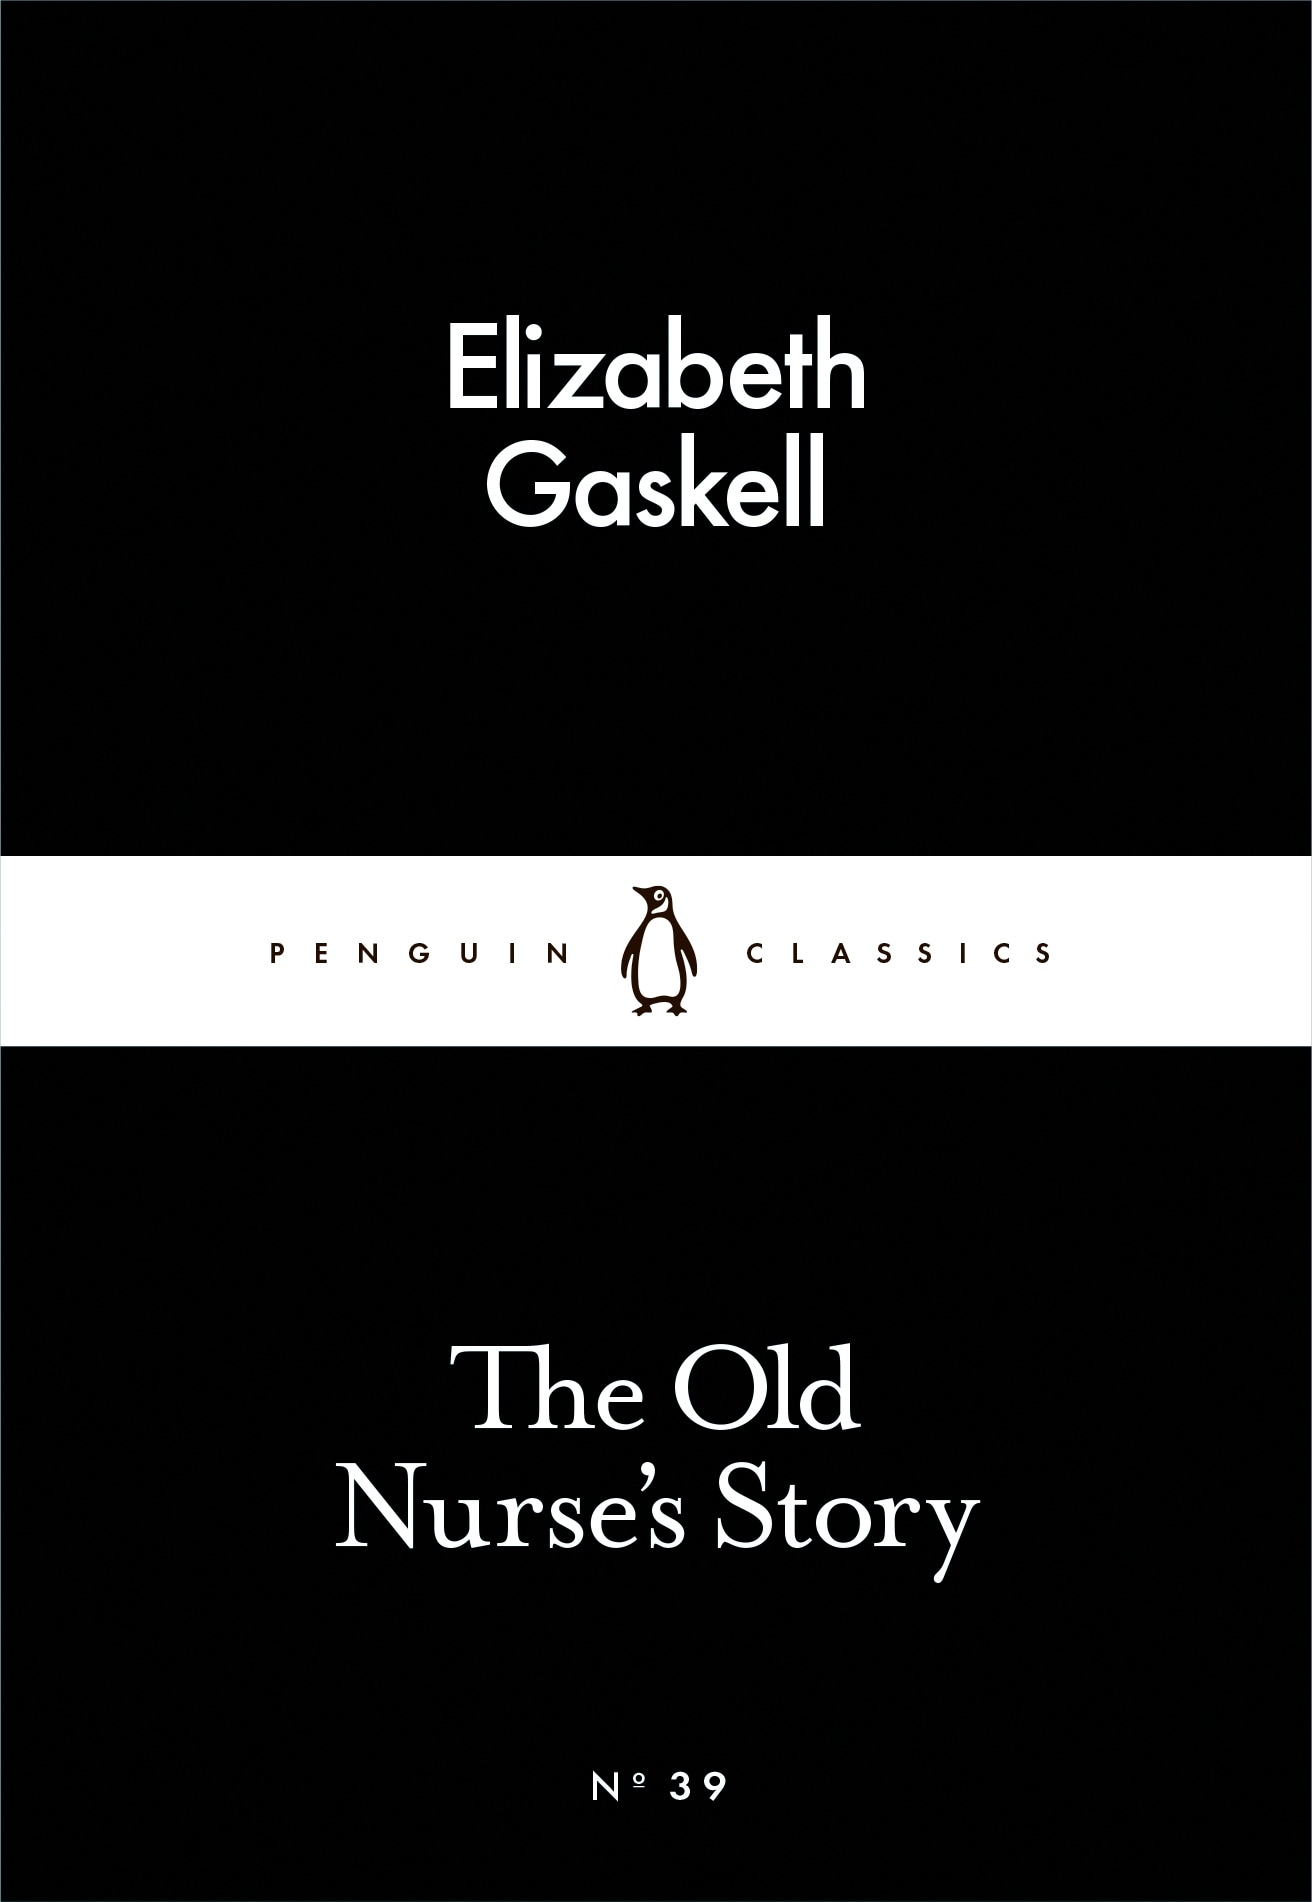 Book “The Old Nurse's Story” by Elizabeth Gaskell — February 26, 2015